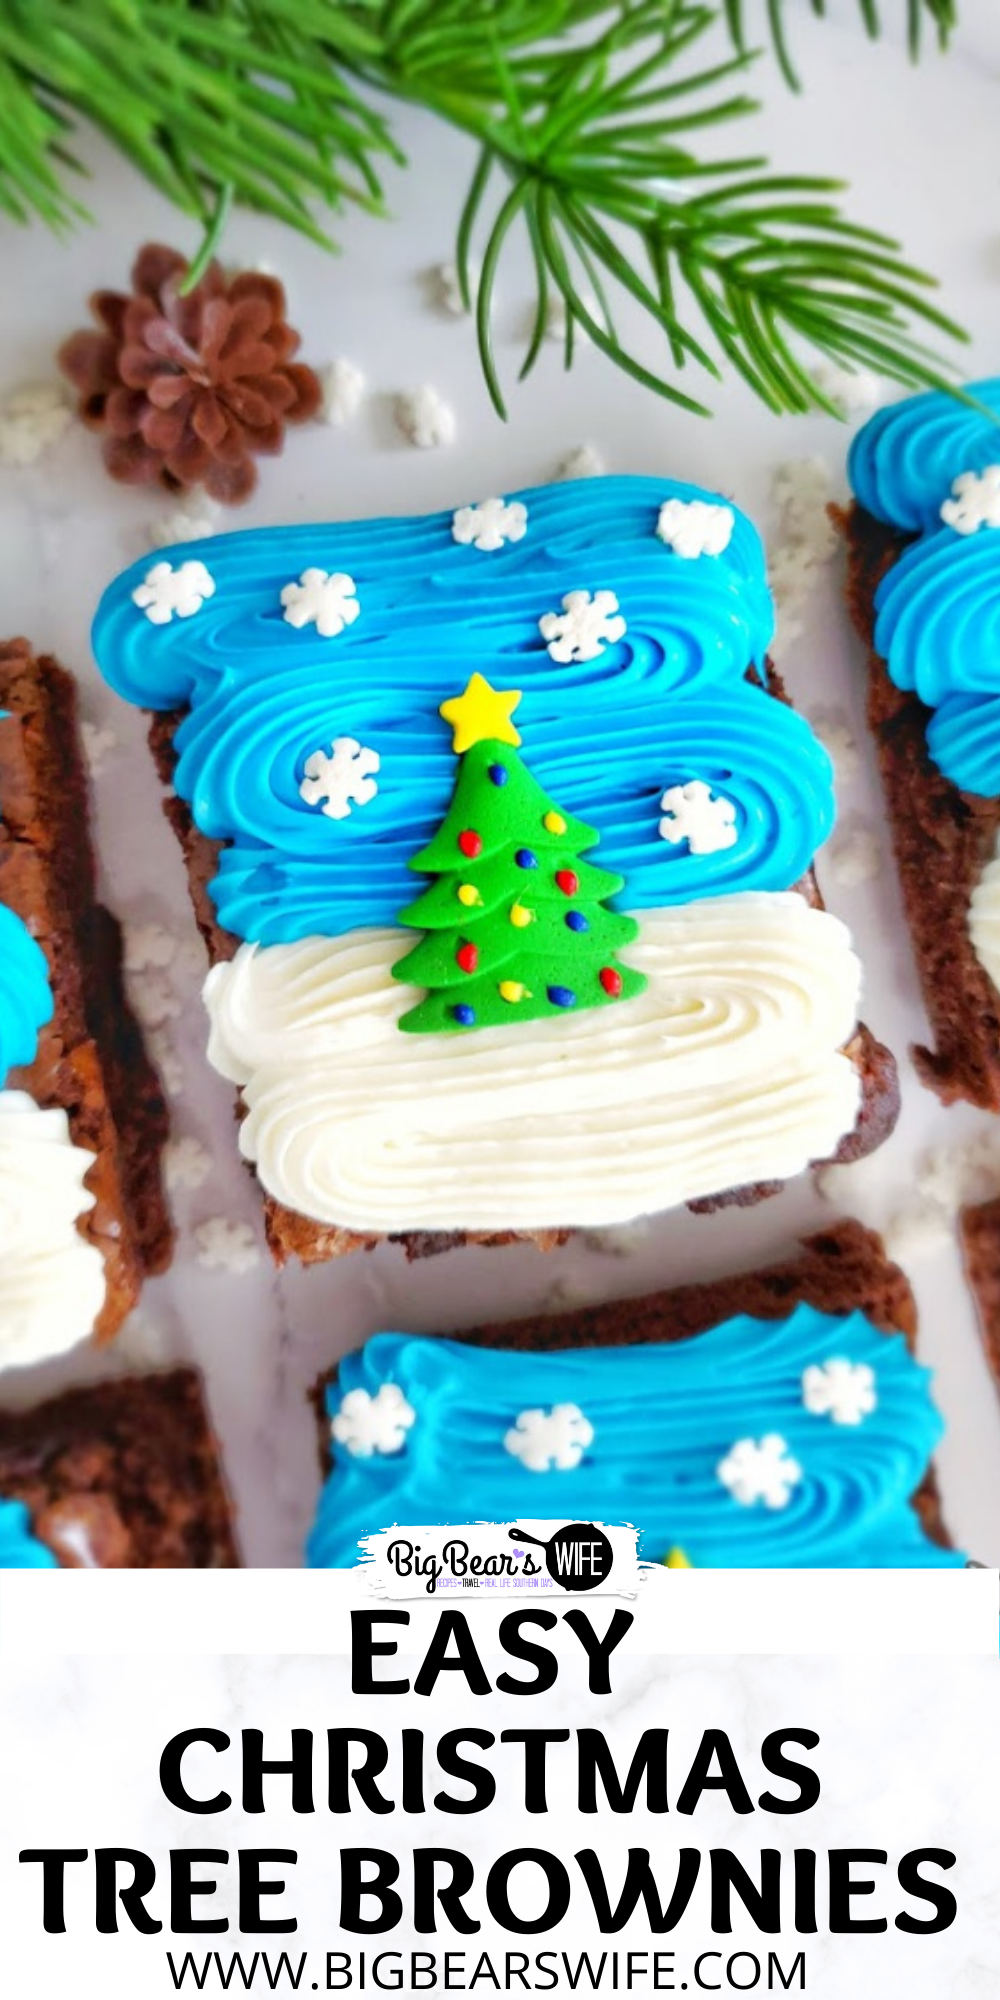 These Easy Christmas Tree Brownies are super festive and simple to make! Use your favorite brownie recipe, my recipe, a boxed mix or brownies from the bakery to create these Christmas treats! via @bigbearswife